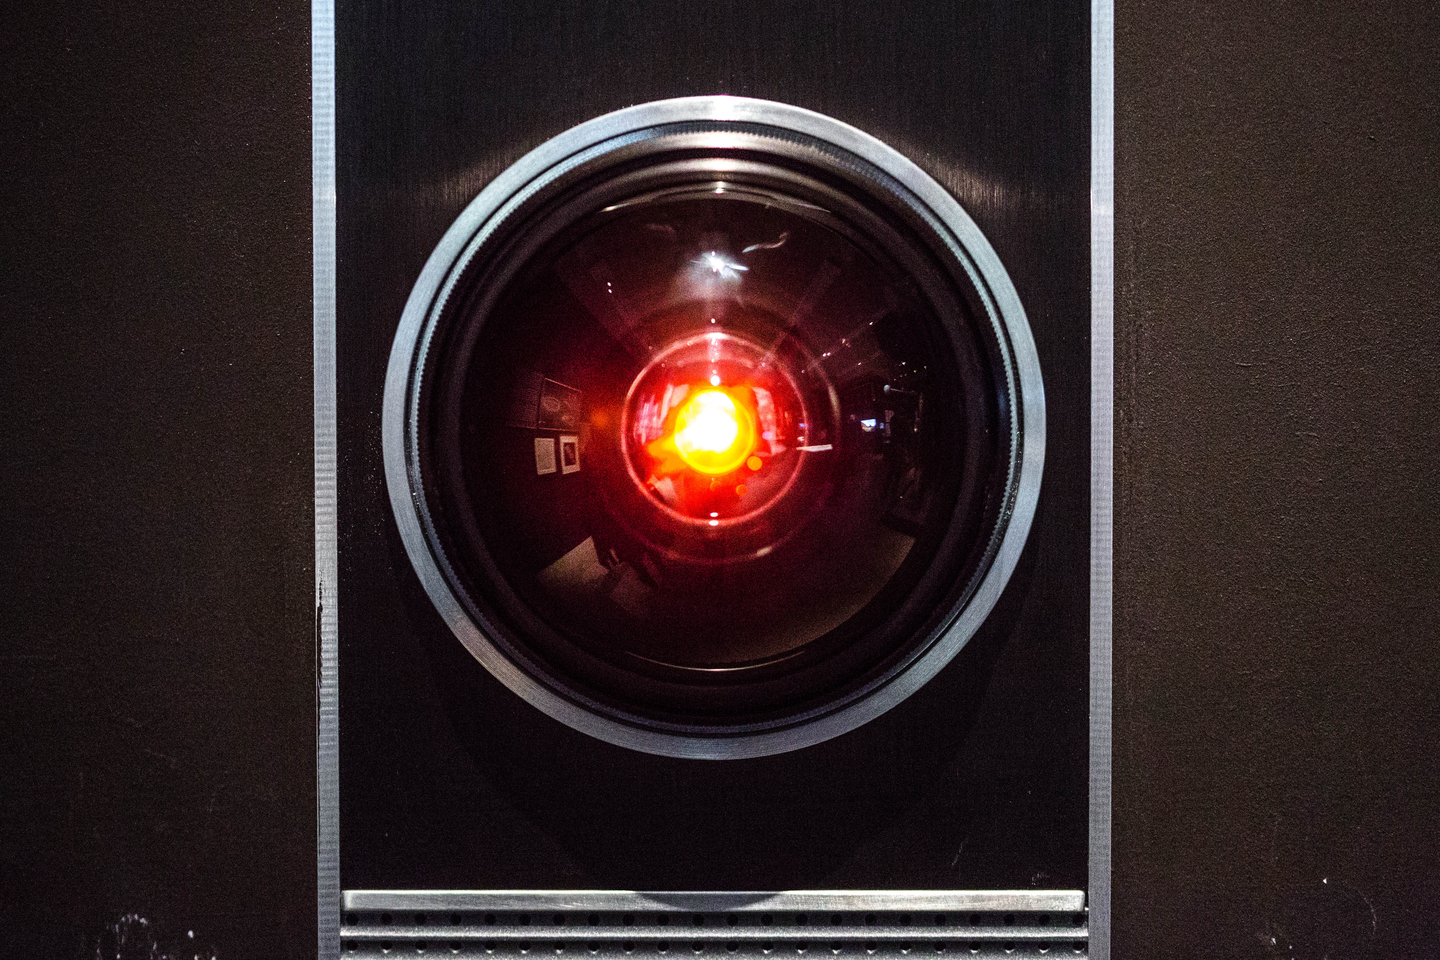 The red light of Hal-900 from 2001: A Space Odyssey